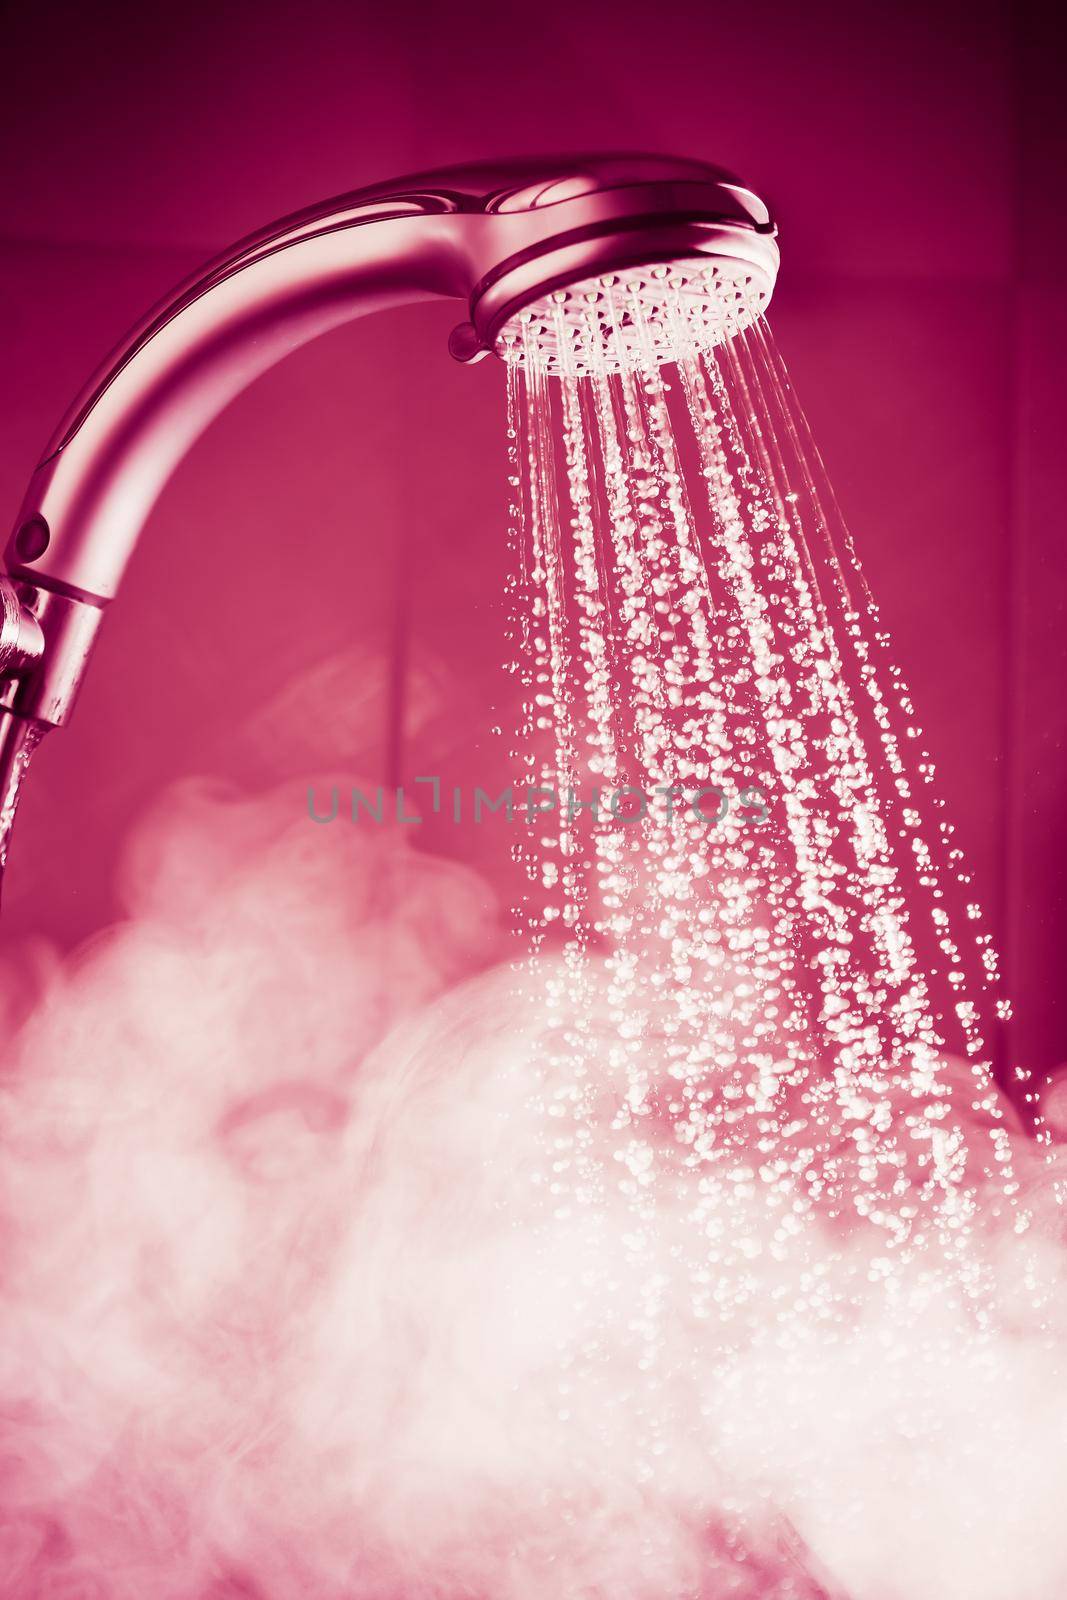 shower with water and steam, pink tone